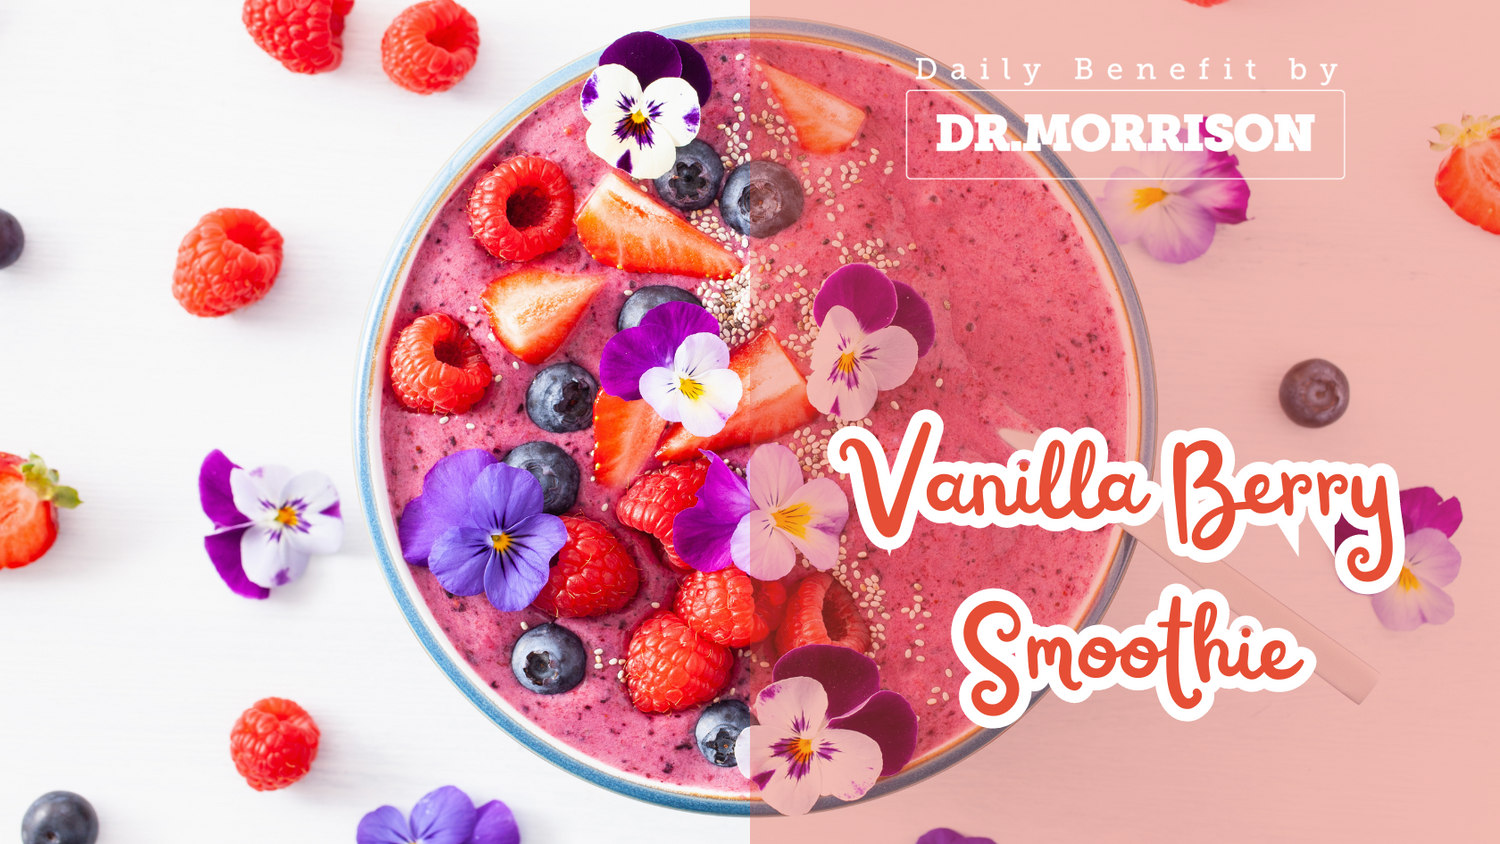 Pink Perfection: Your Berrylicious Gut-Loving Smoothie!